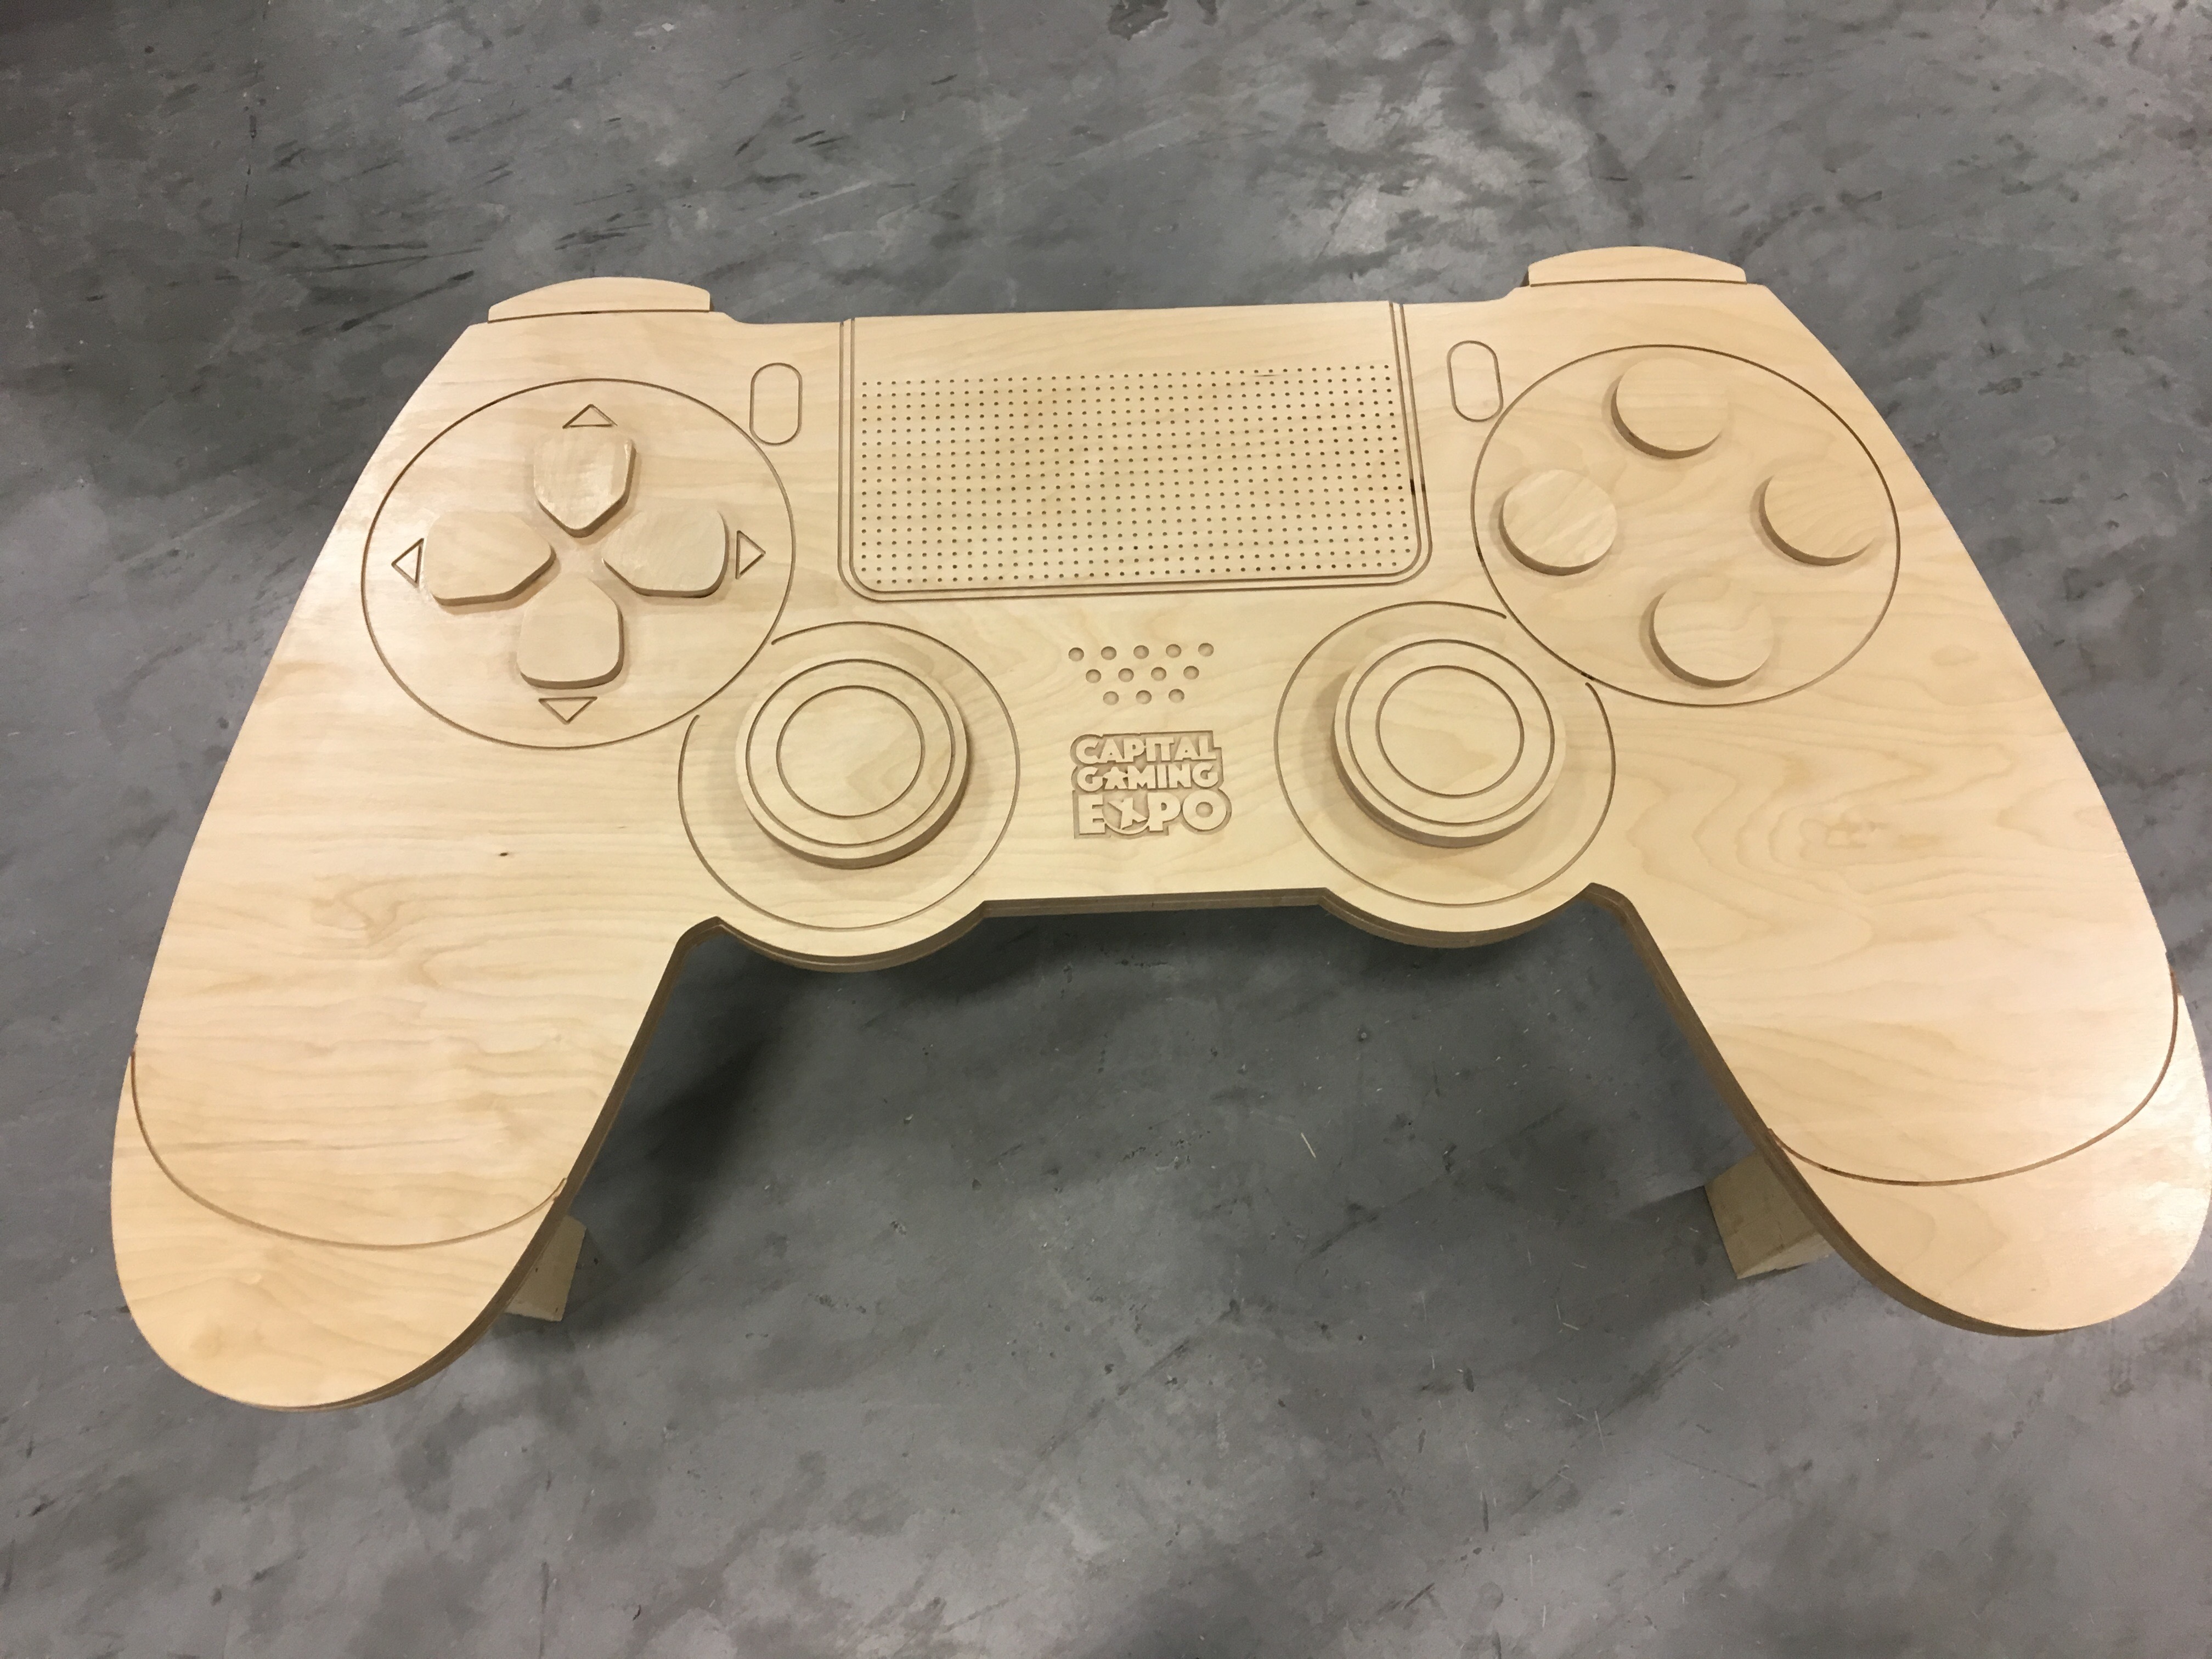 A plywood bench resembling a PS3 controller